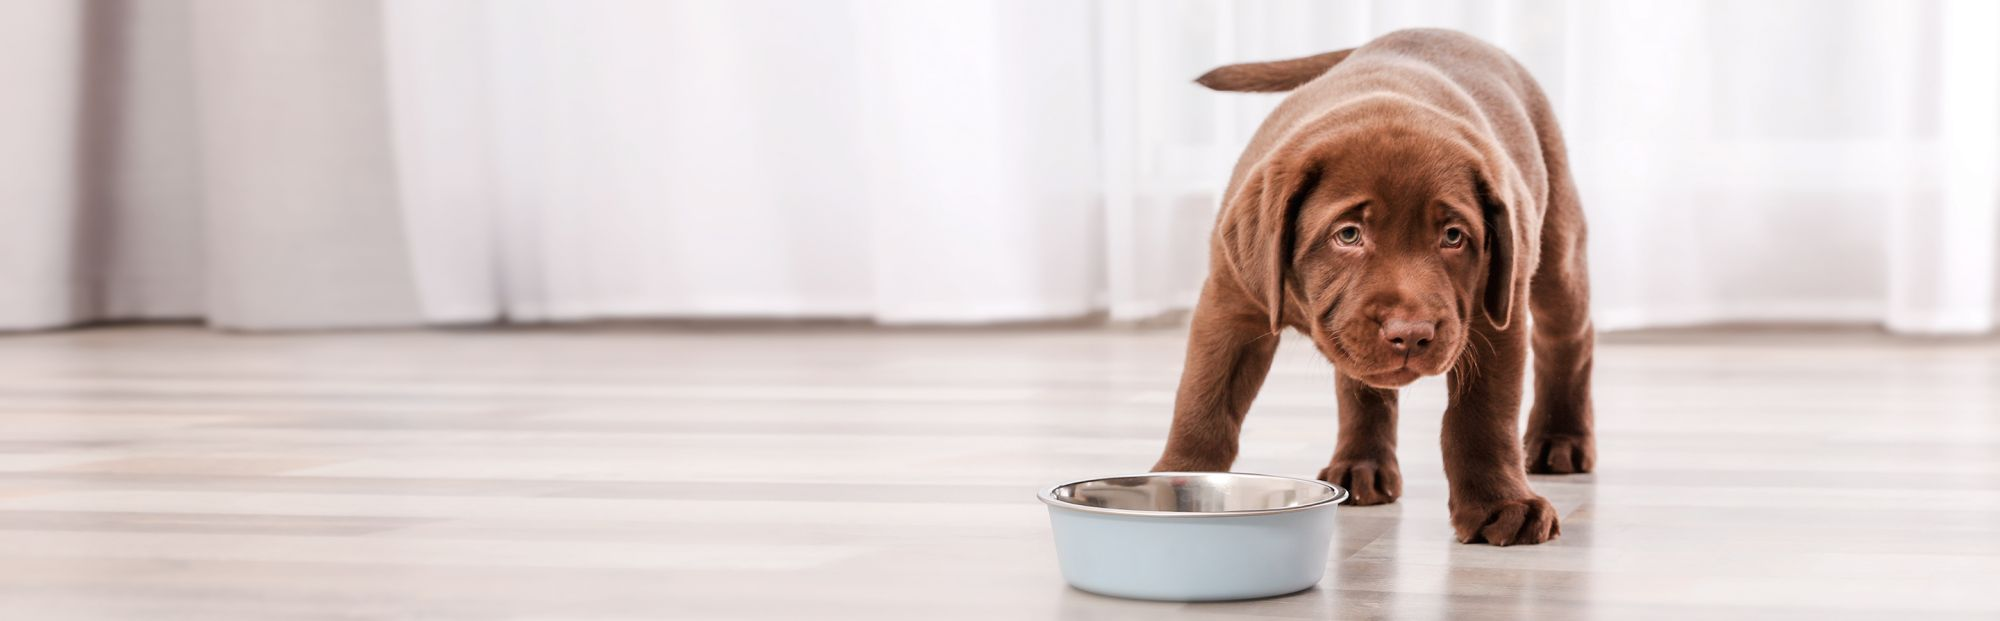 Brown Labrador Retriever puppy standing indoors next to a stainless steel feeding bowl